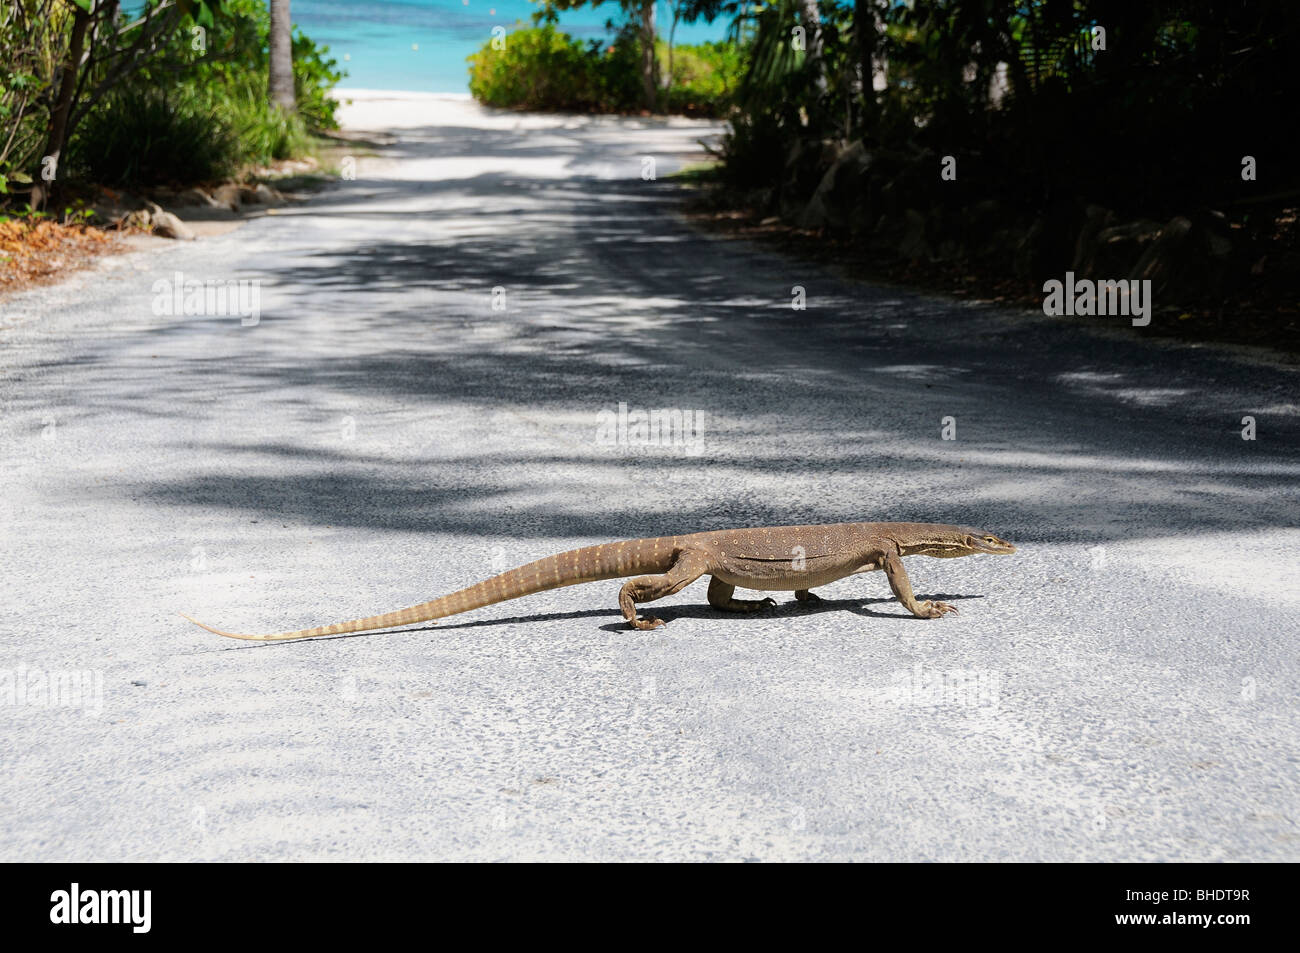 The Argus monitor or Yellow-spotted monitor lizard (Varanus panoptes) walking across a small road in the Lizard Island Resort, Queensland,Australia Stock Photo